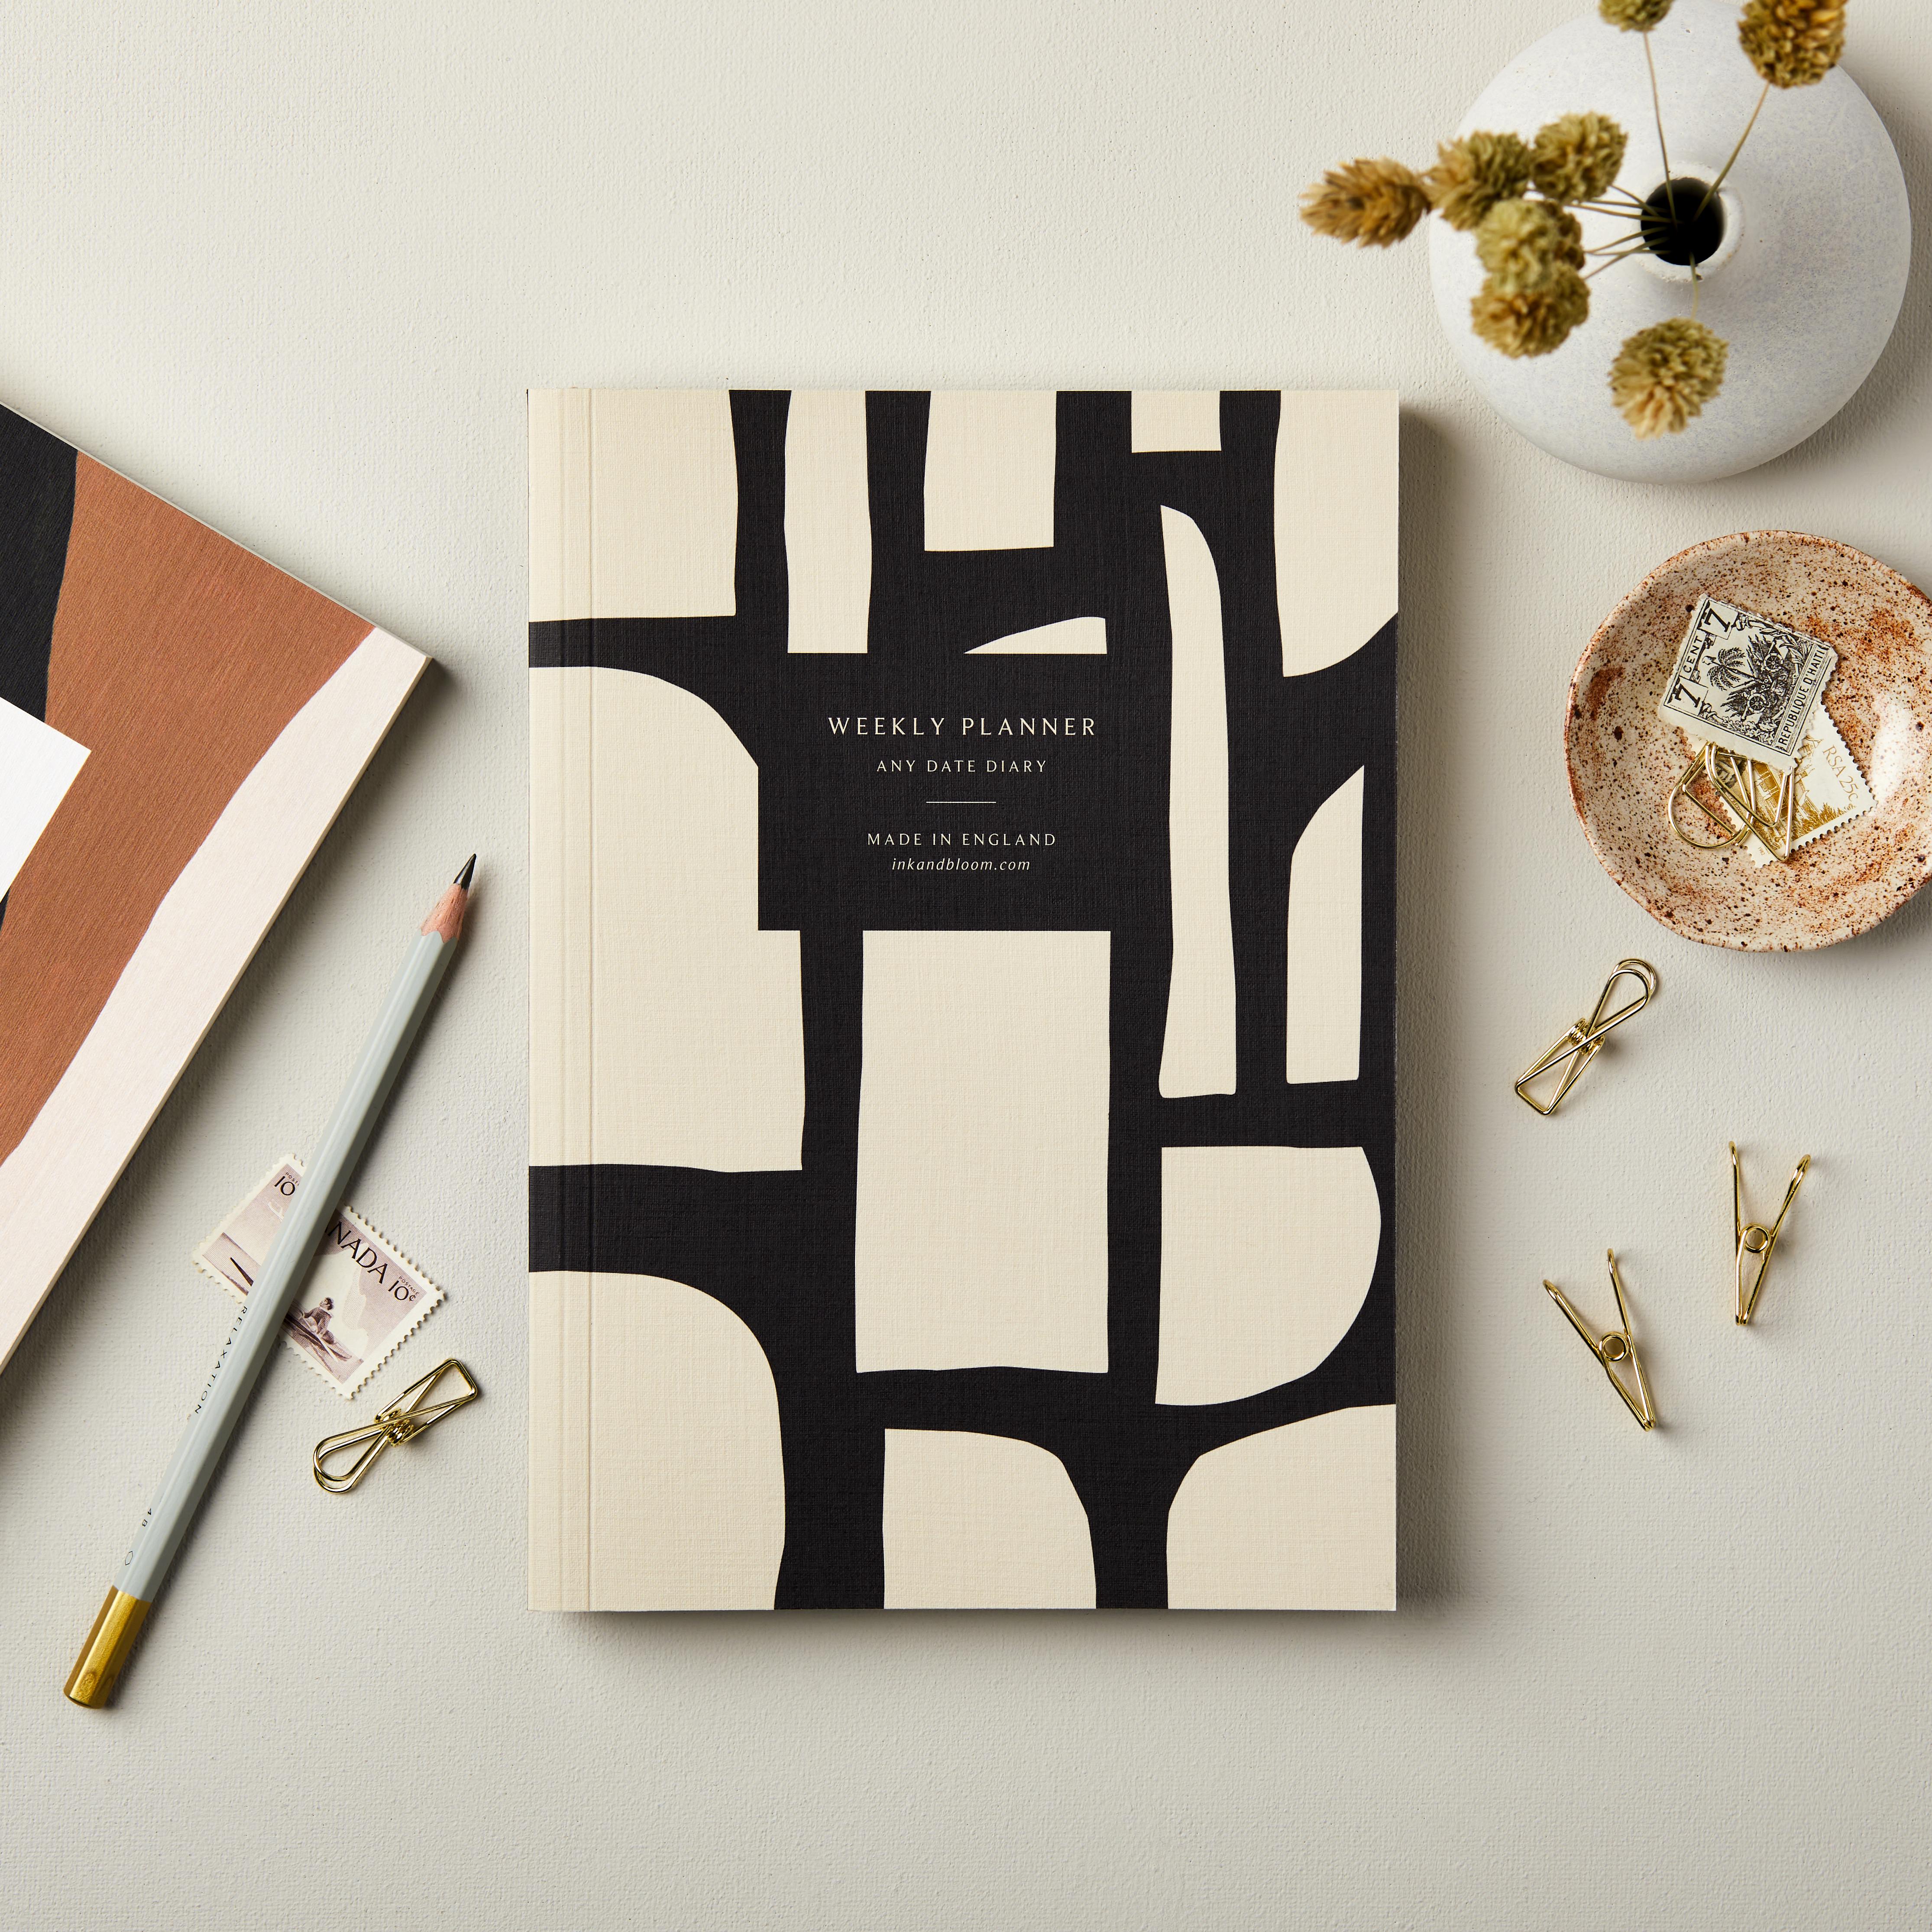 Weekly Planner,  A5, Undated with 'Any Date Diary' text, abstract black/cream design, on cream backdrop with vase and stationery.